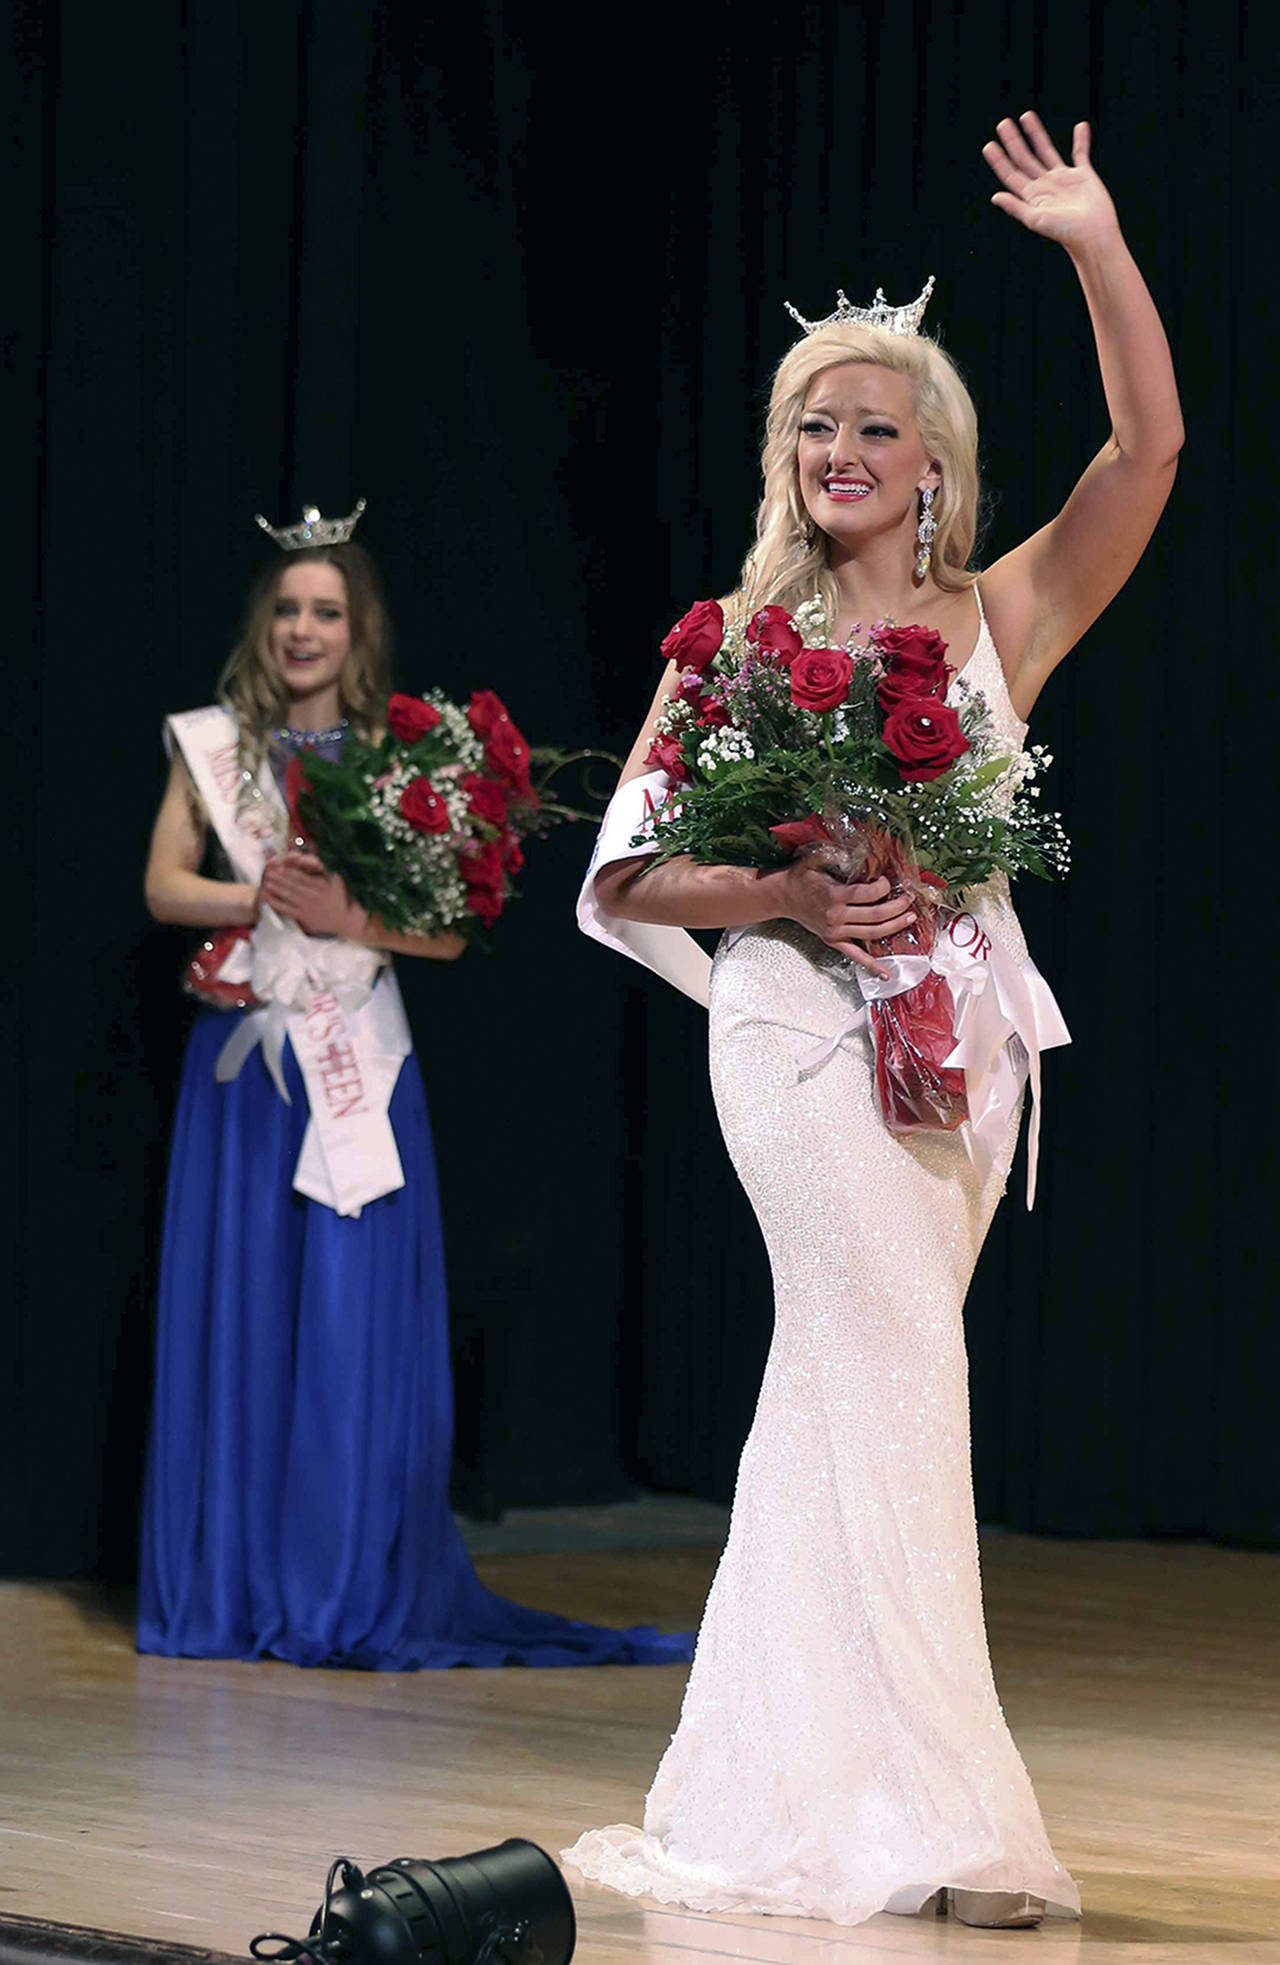 (Keith J. Krueger) Kuinn Karaffa waves after being crowned Miss Grays Harbor 2018. Behind her is Mercedes Morrill, winner of Grays Harbor Outstanding Teen 2018. They will be crowning their successors Saturday evening at the 7th Street Theatre.